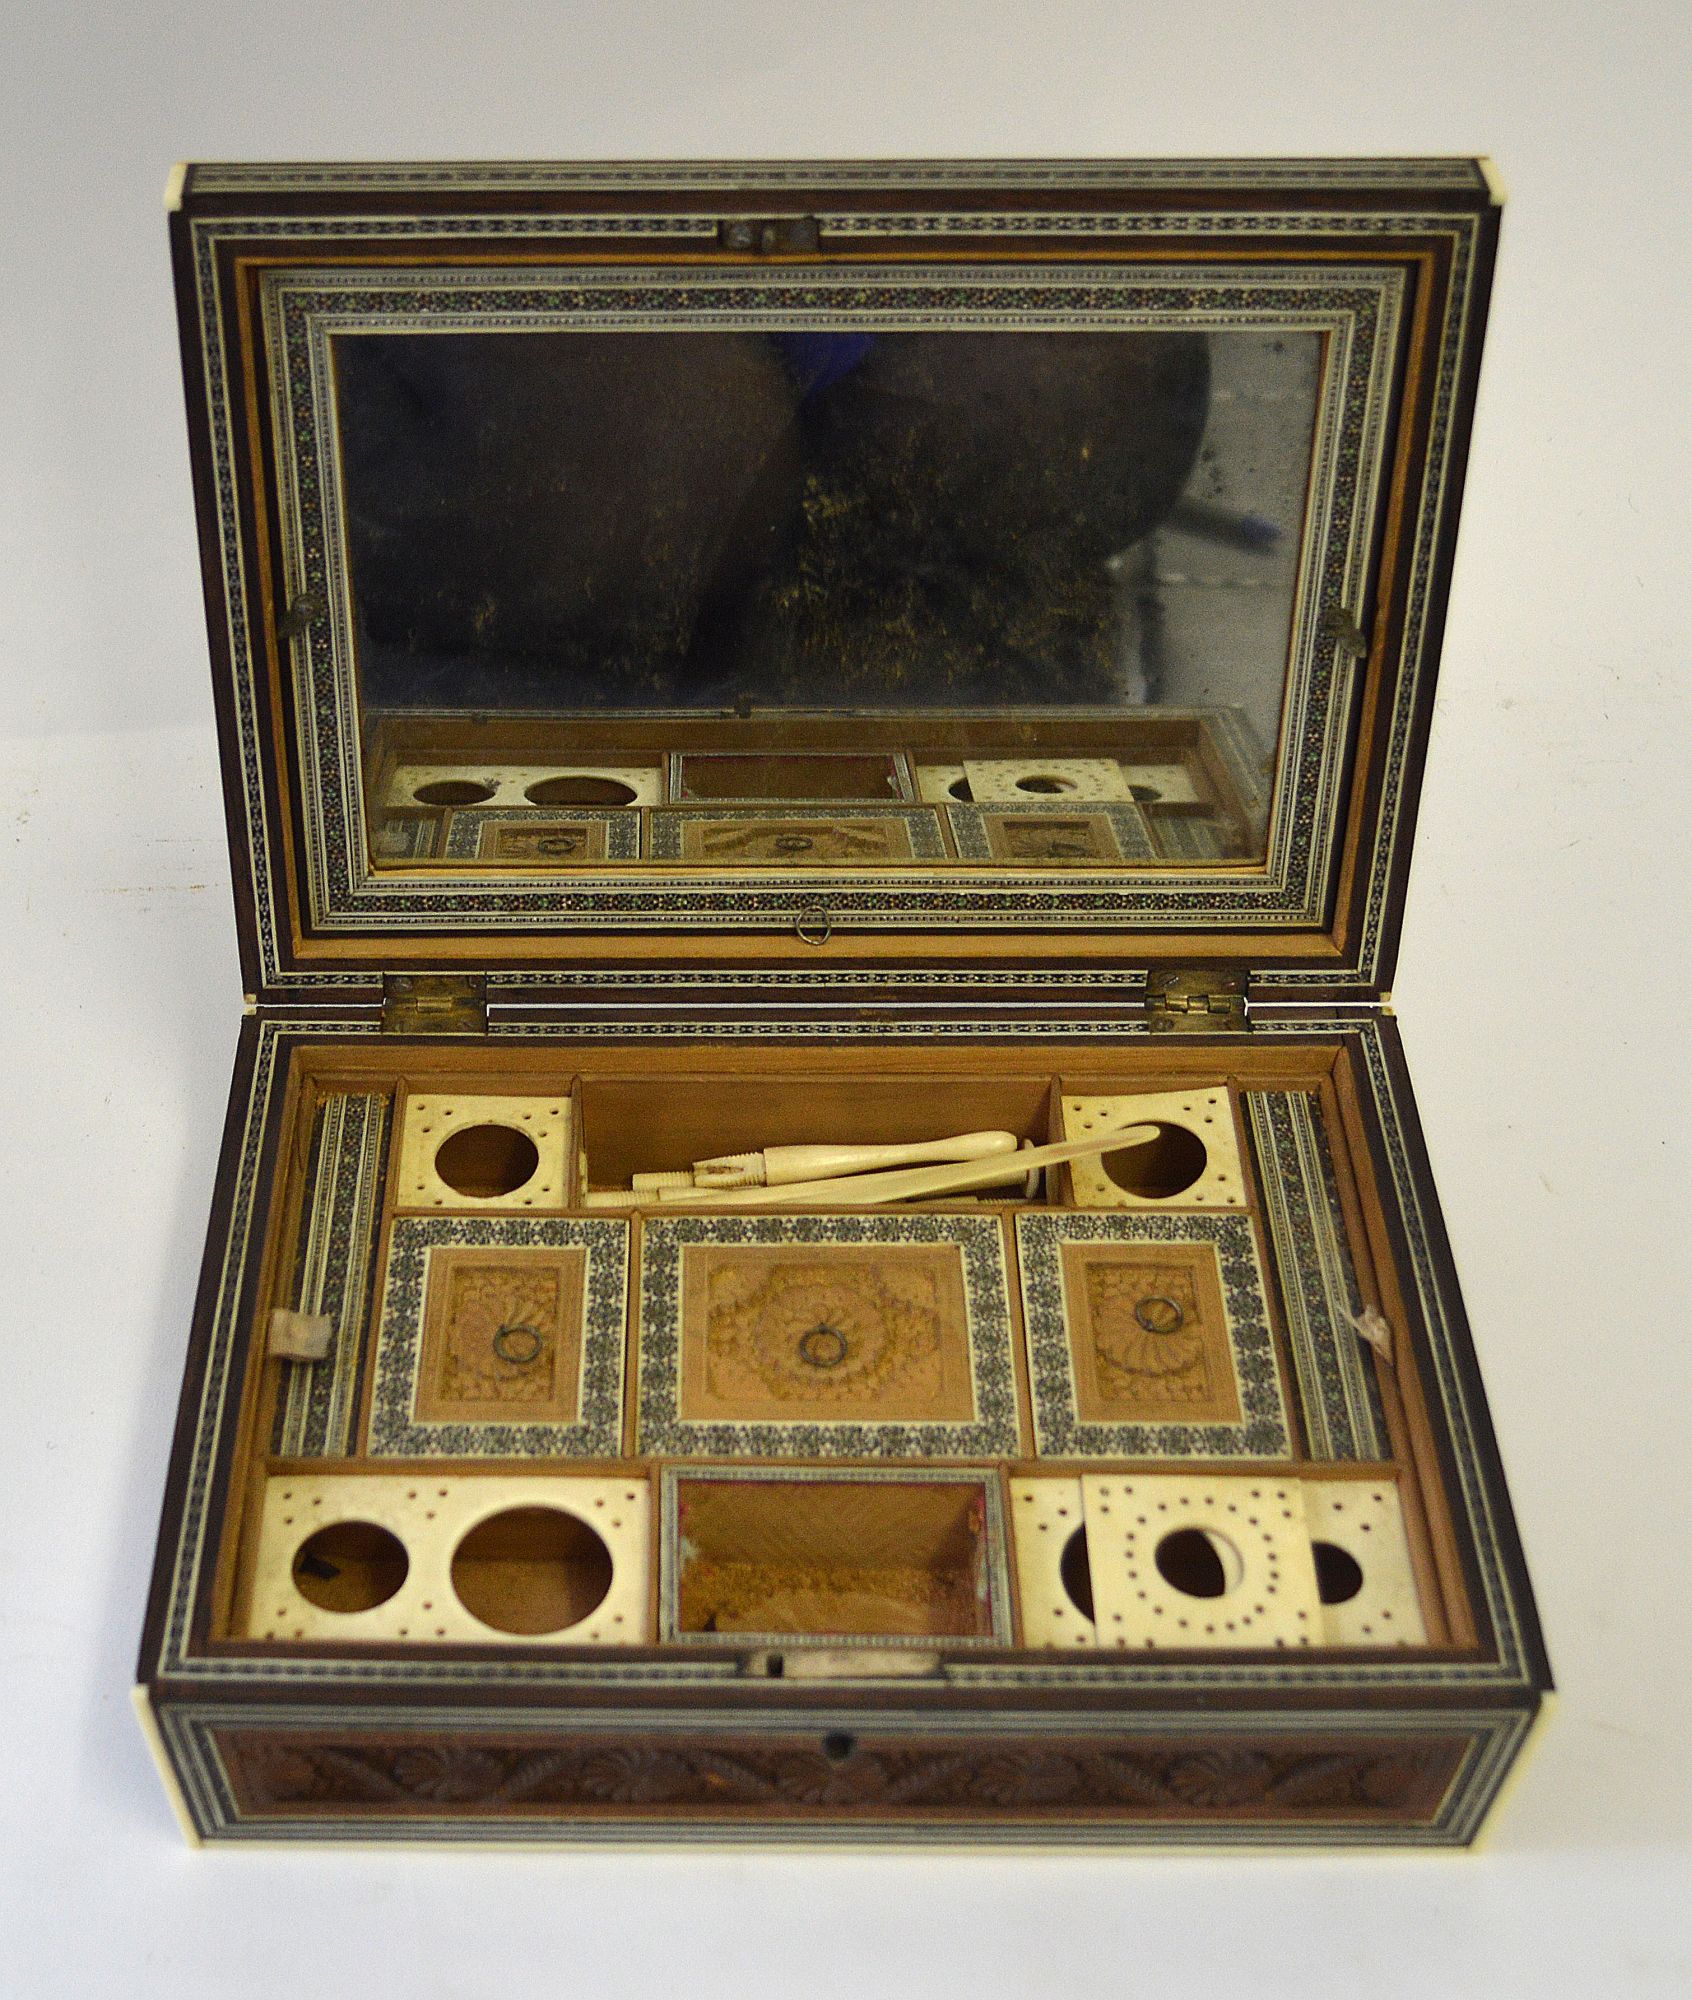 An early 20th century Anglo-Indian Vizagapatam sandalwood sewing/jewellery box, - Image 2 of 2